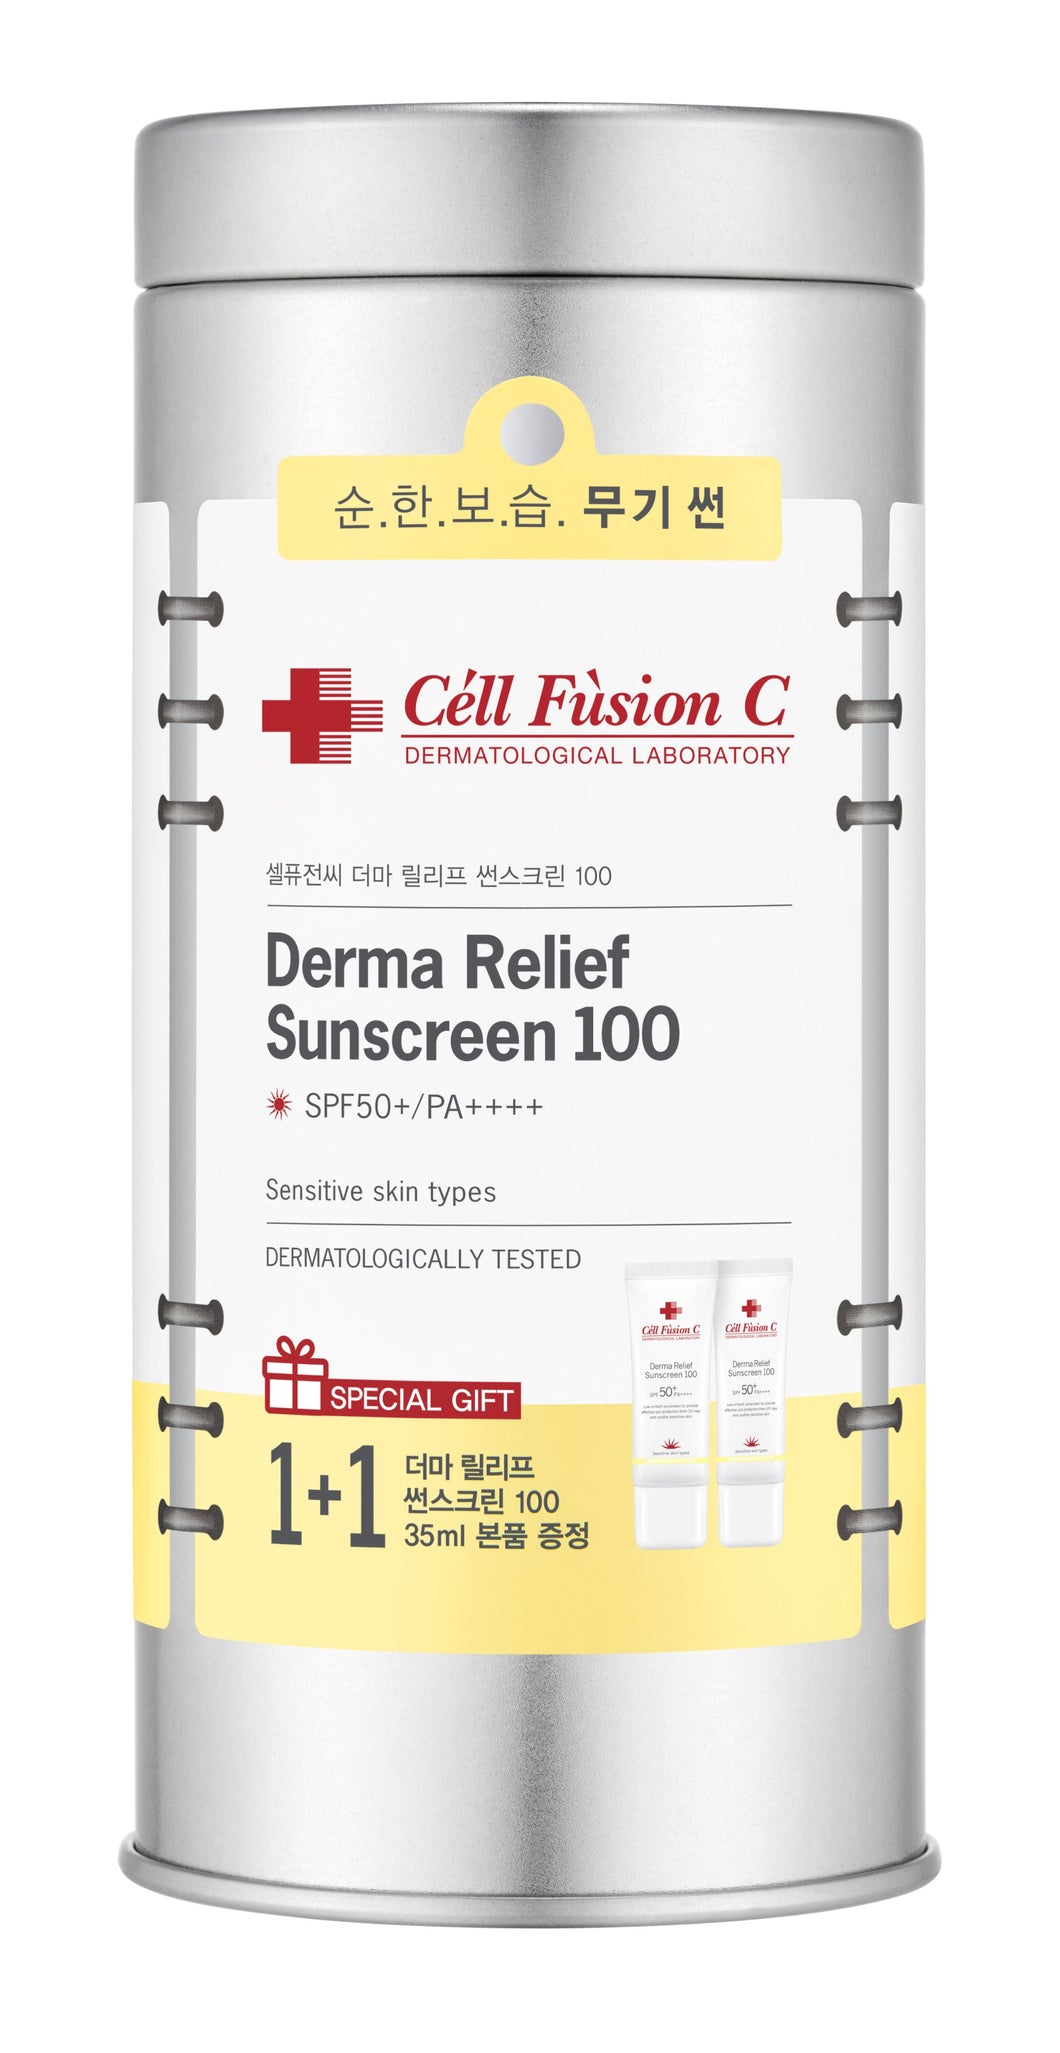 [Cell Fusion C] Derma Relief Sunscreen 100 SPF50/PA++++ 2pcs